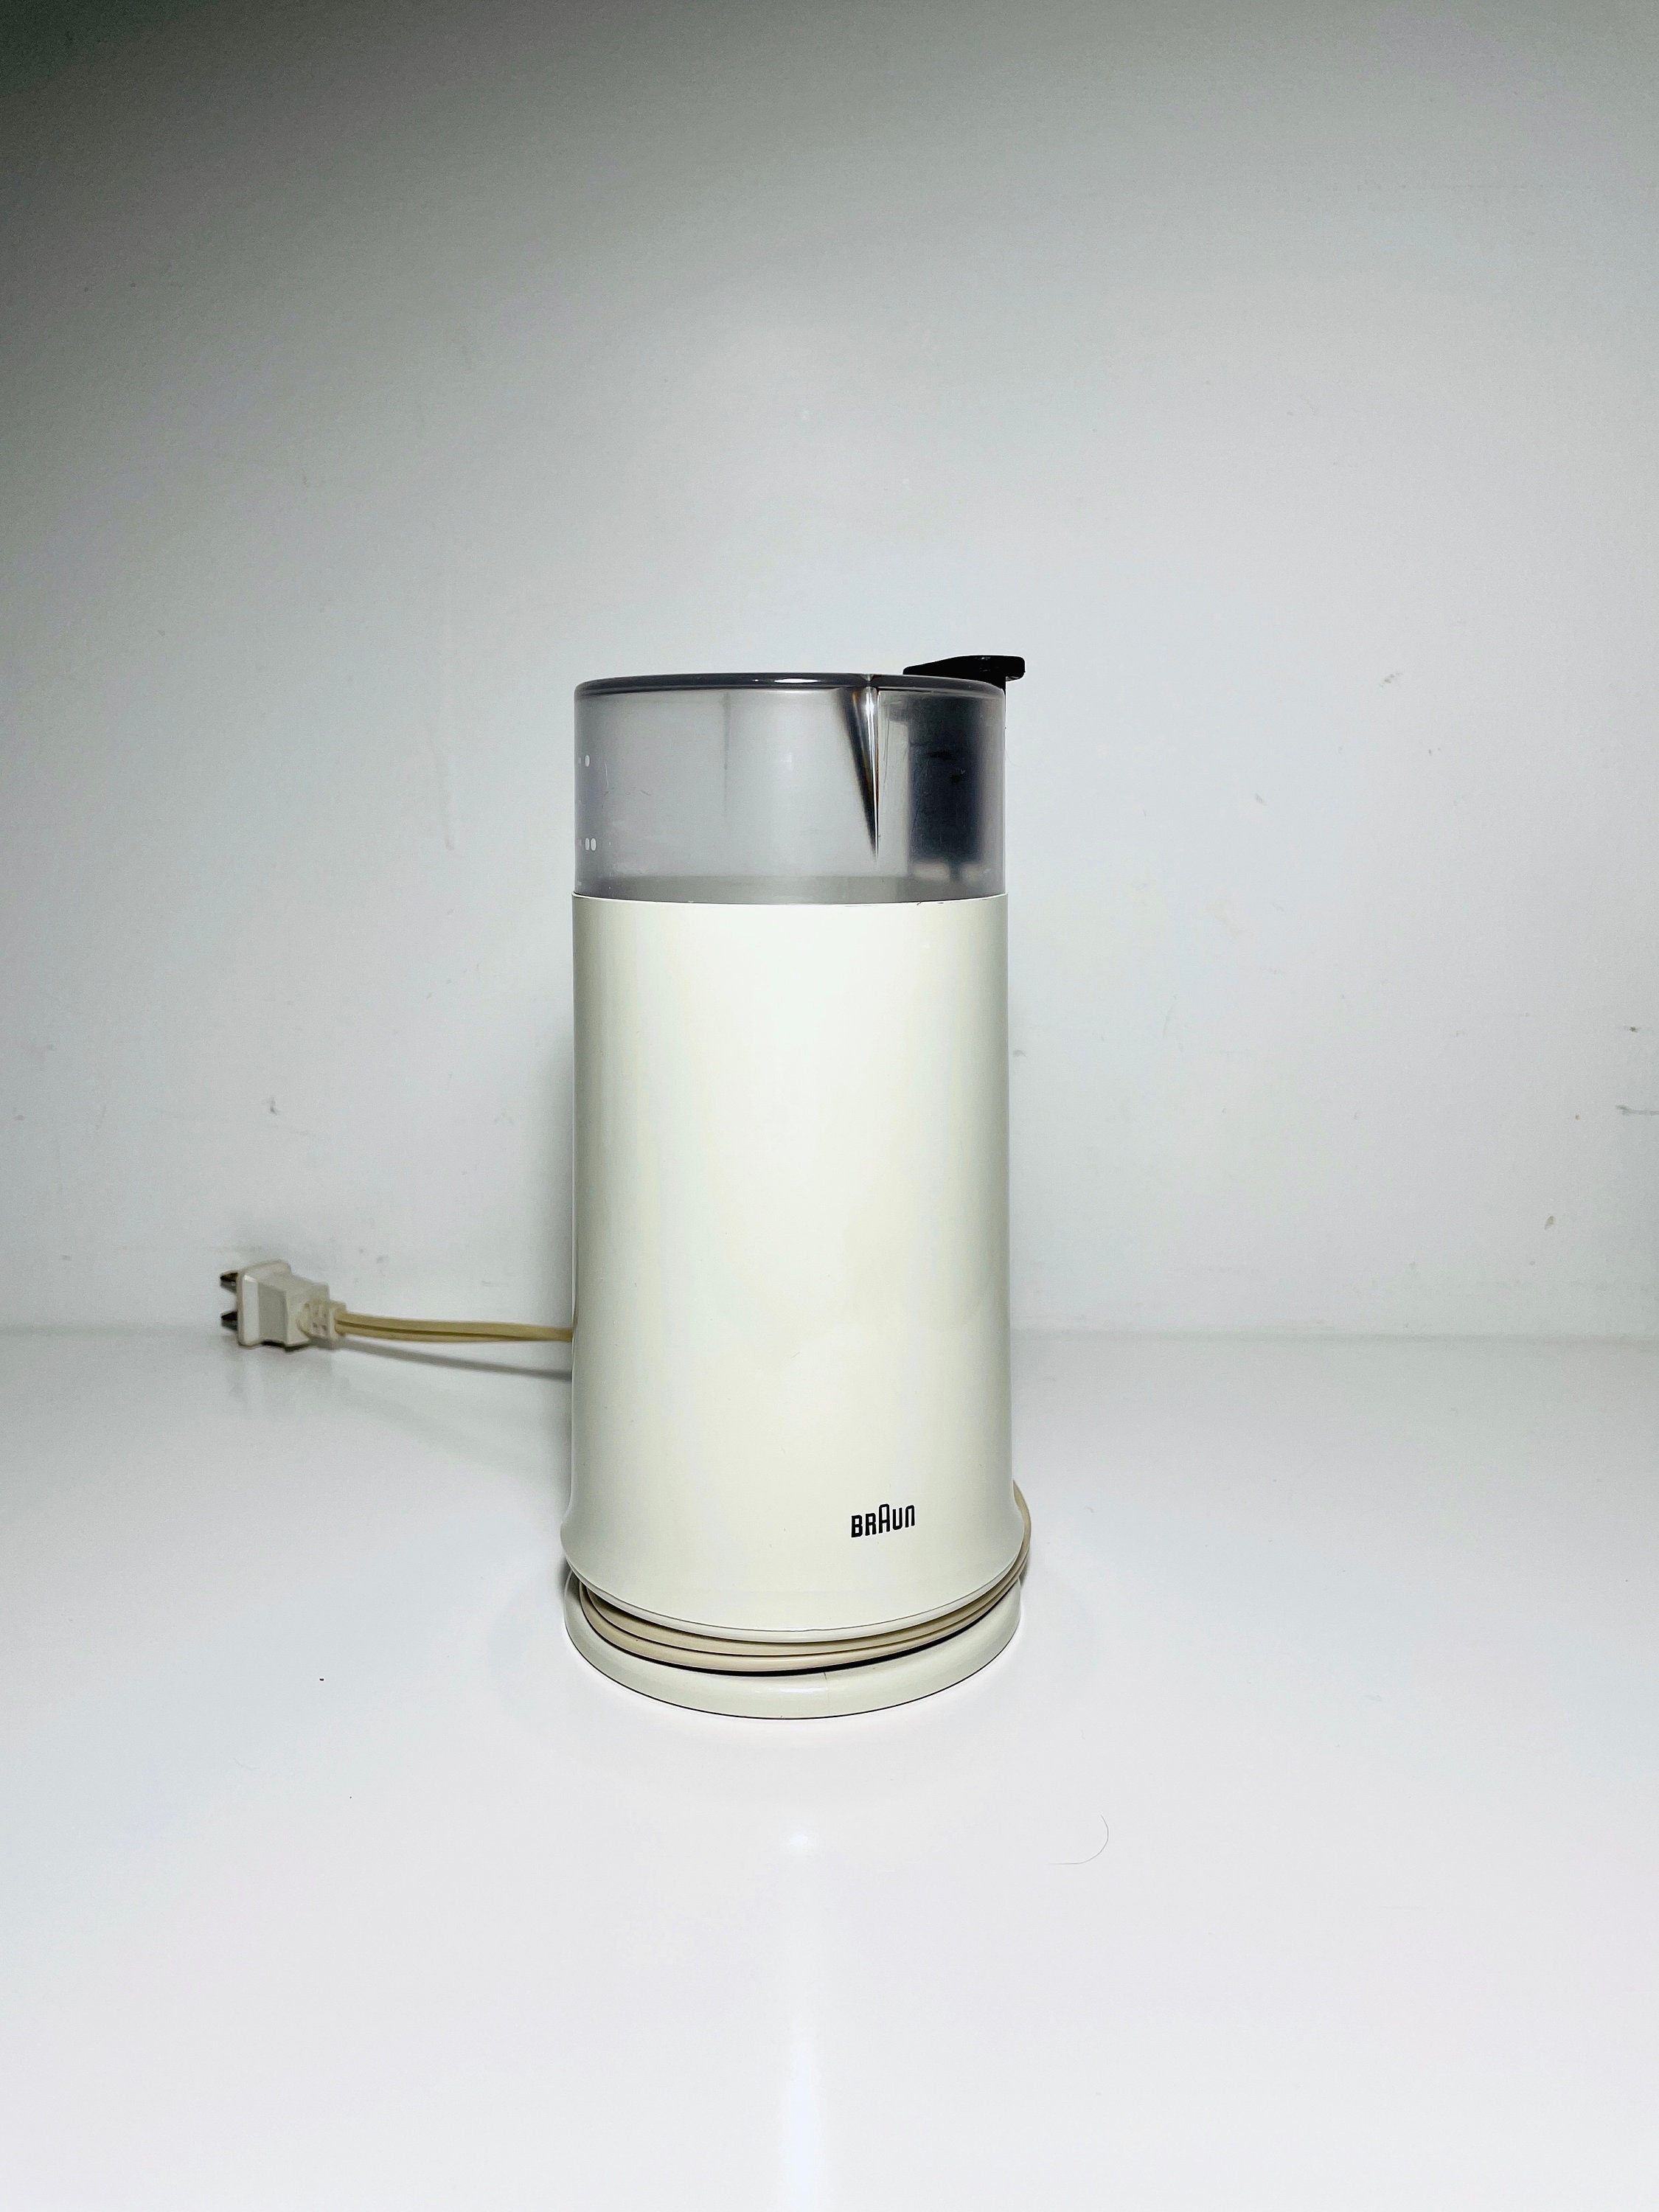 Braun Coffee Grinder White Vintage - Tested and Works - Type 4041